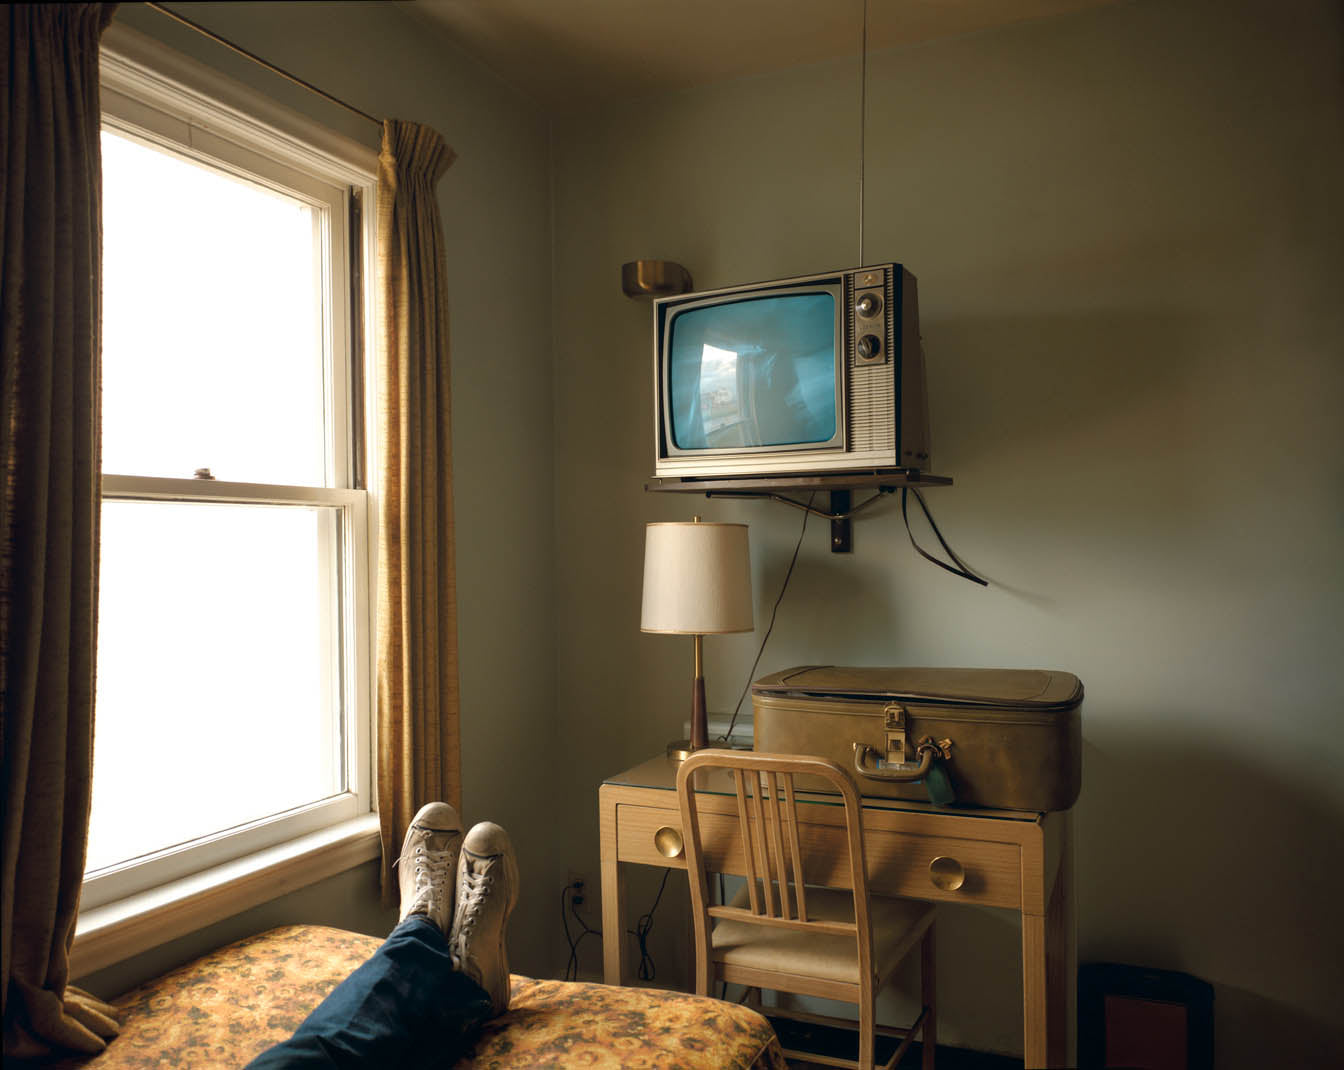 Stephen Shore - Uncommon Places: The Complete Works